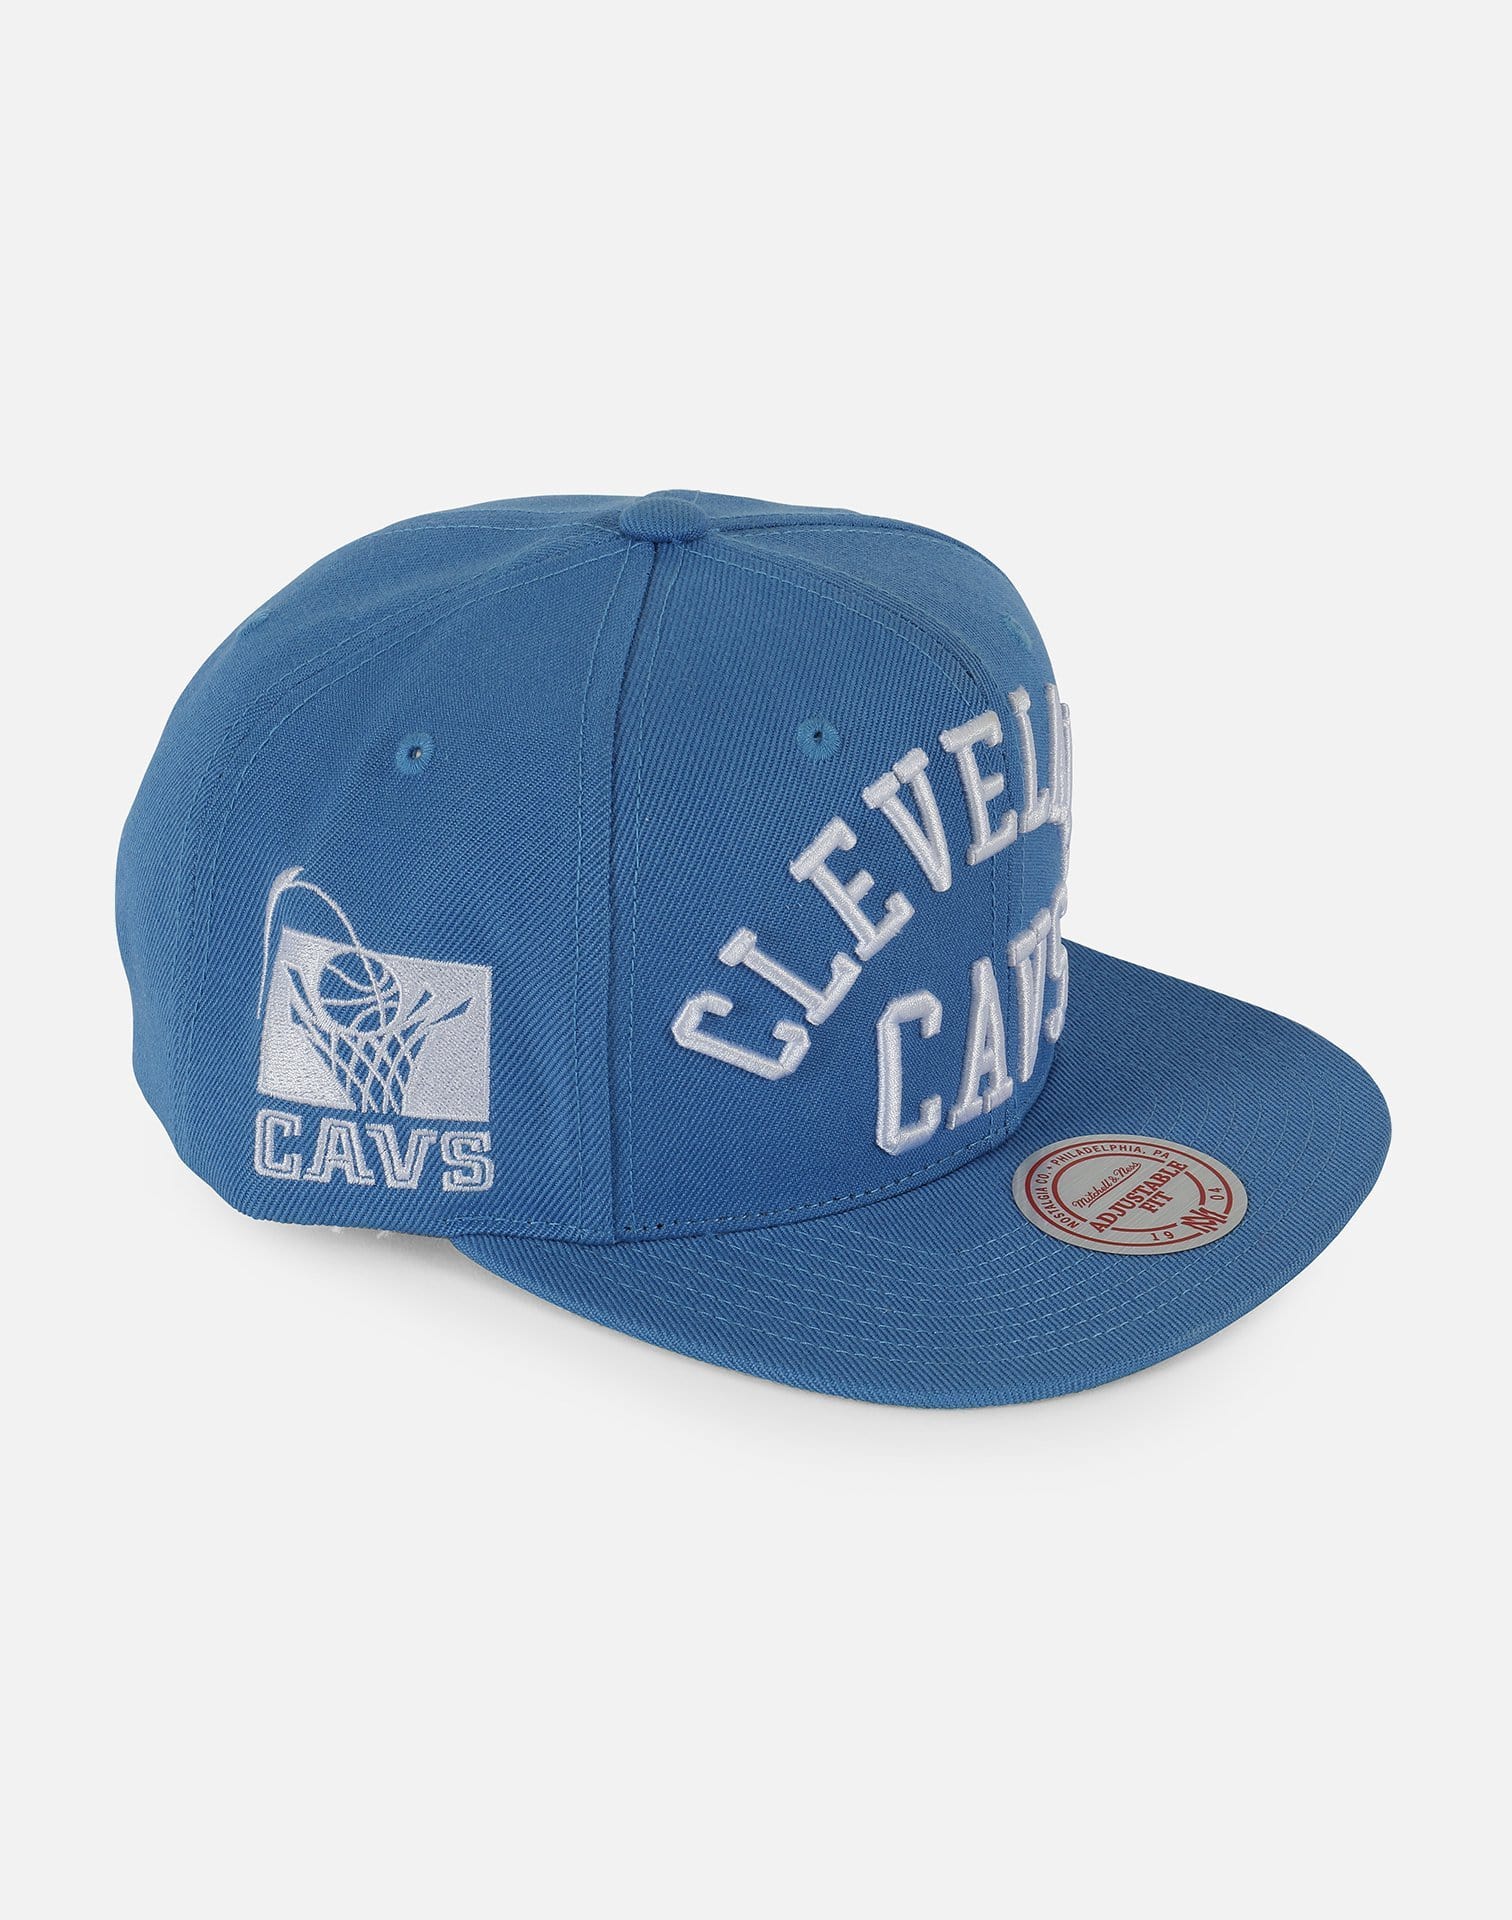 Mitchell and Ness Cleveland Cavaliers Snapback Hat